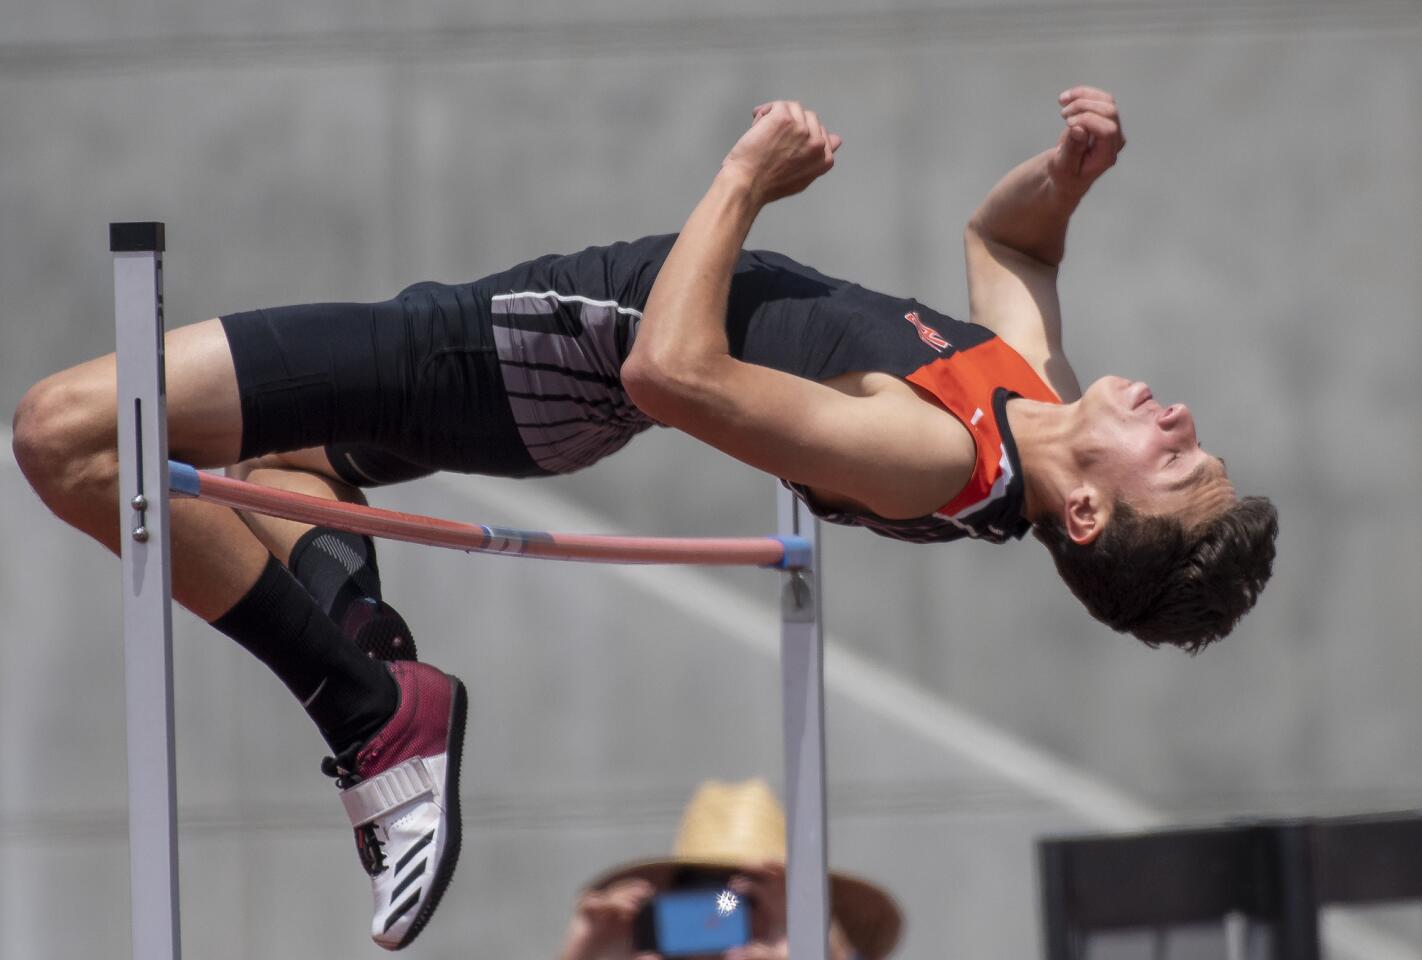 Huntington Beach's Jack Wiseman finished first place with 6-10 in the CIF Southern Section Masters Meet at El Camino College on Saturday, May 18.